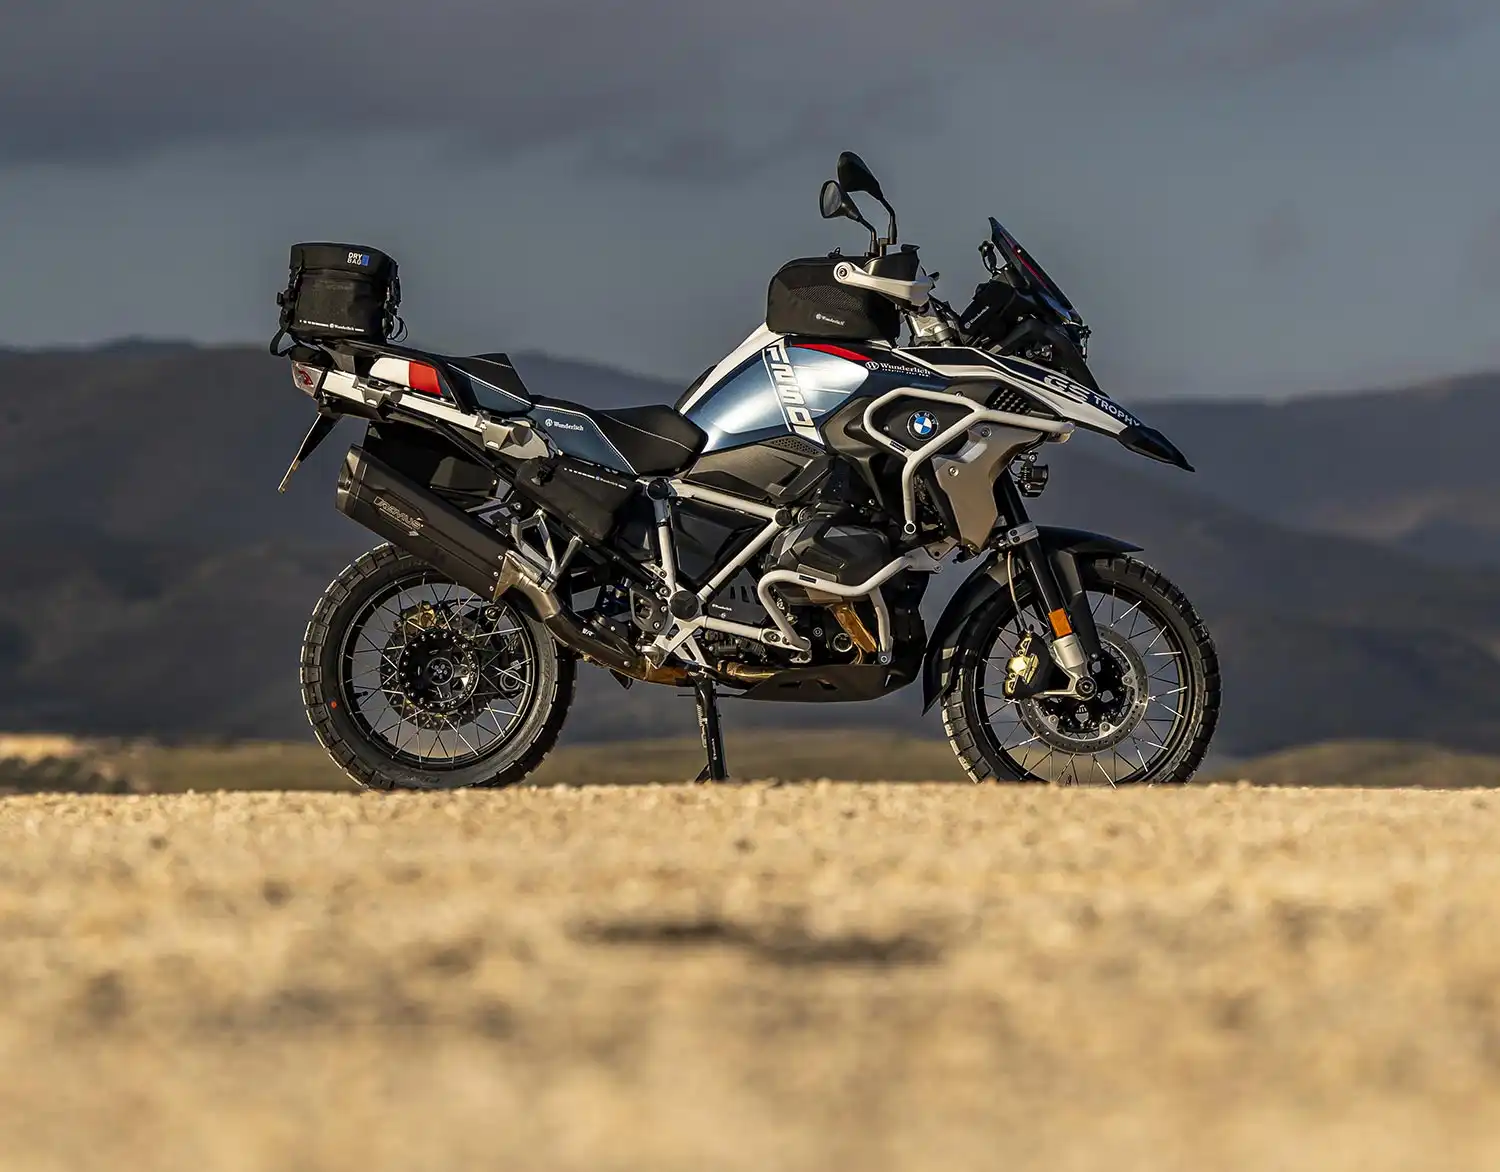 BMW R1250GS Accessories and Upgrades Part 1 of 2 ---- 17 Budget Accessories  on Test - ENG/DEU 